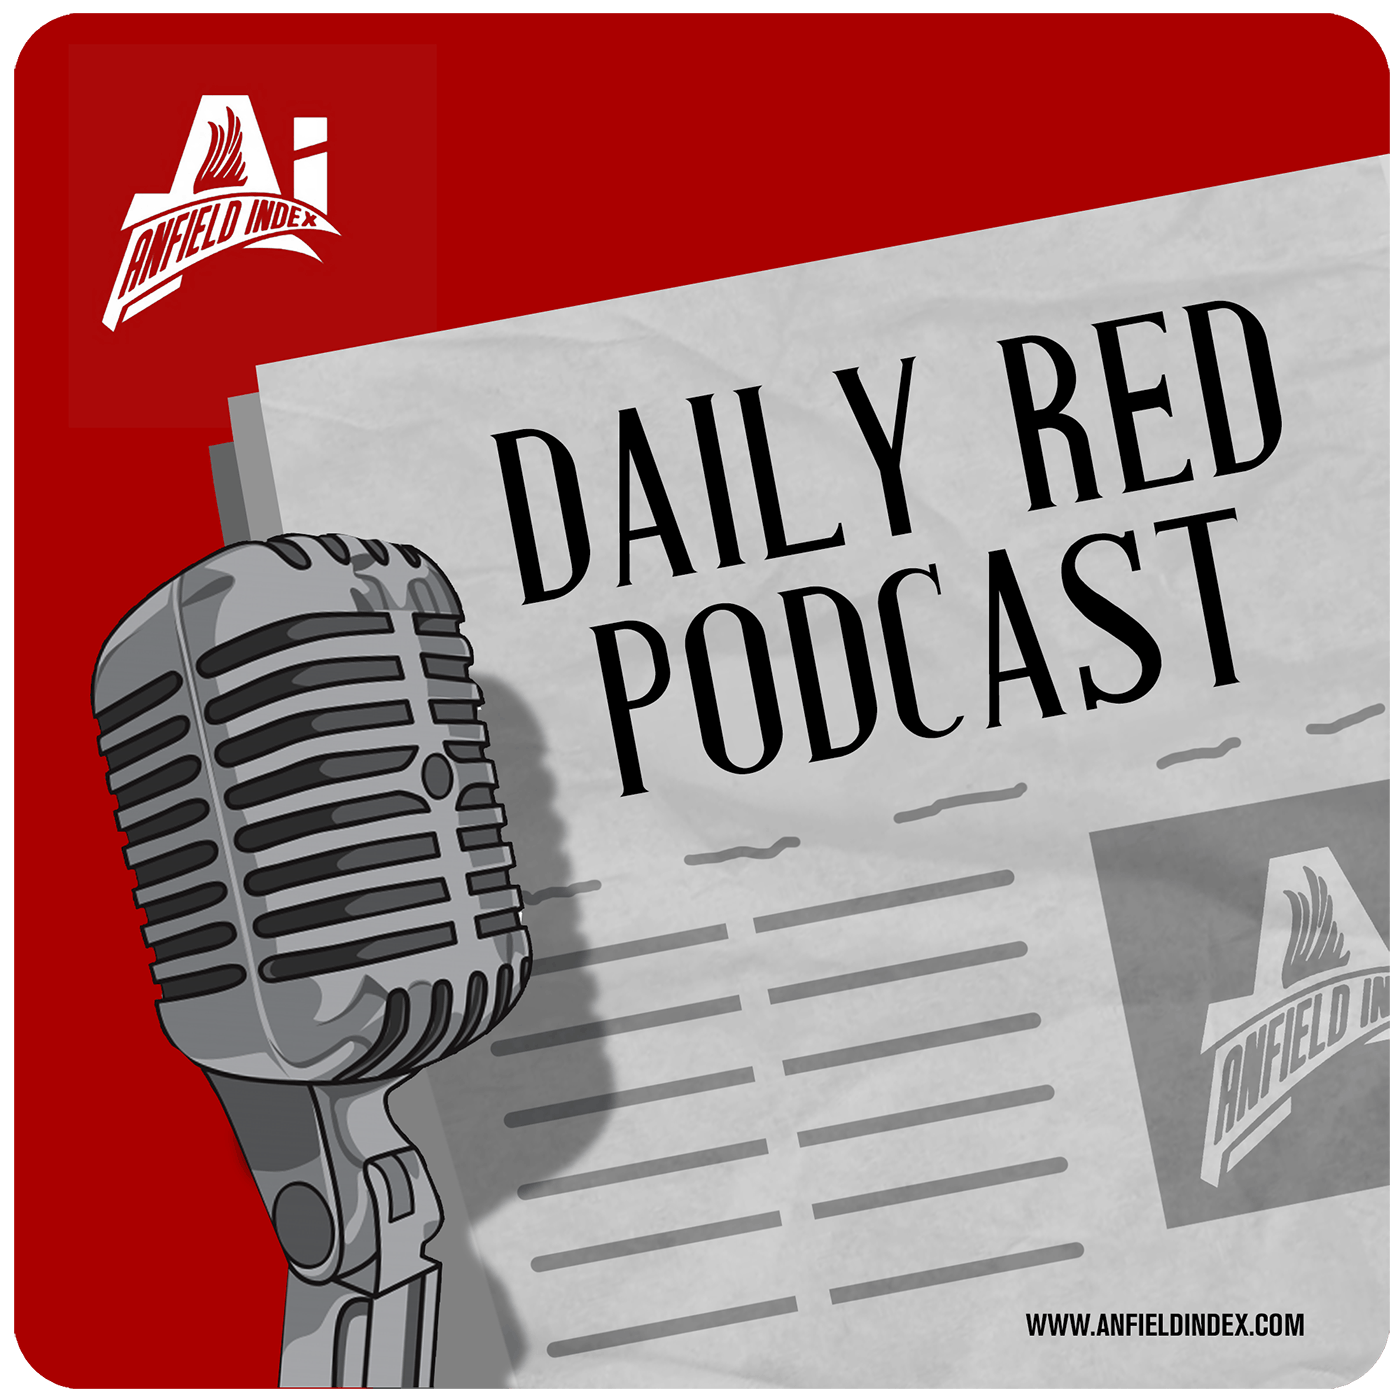 Quansah Ready For International Football?: Daily Red Podcast